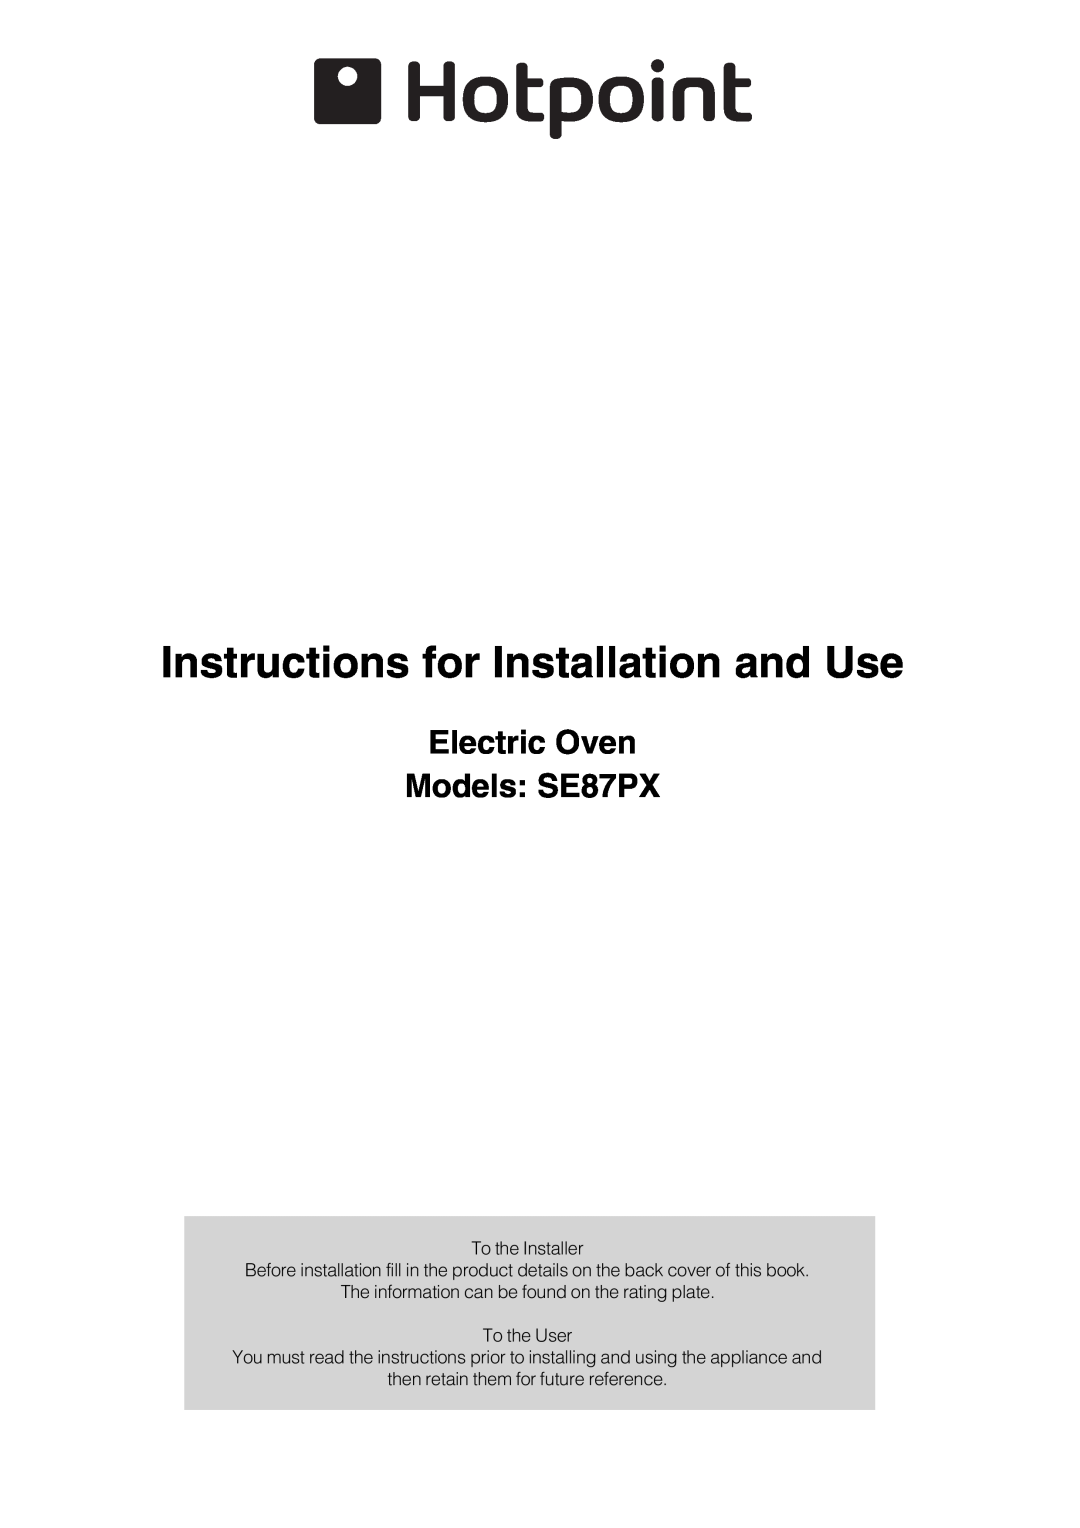 Hotpoint manual Instructions for Installation and Use, Electric Oven Models SE87PX 